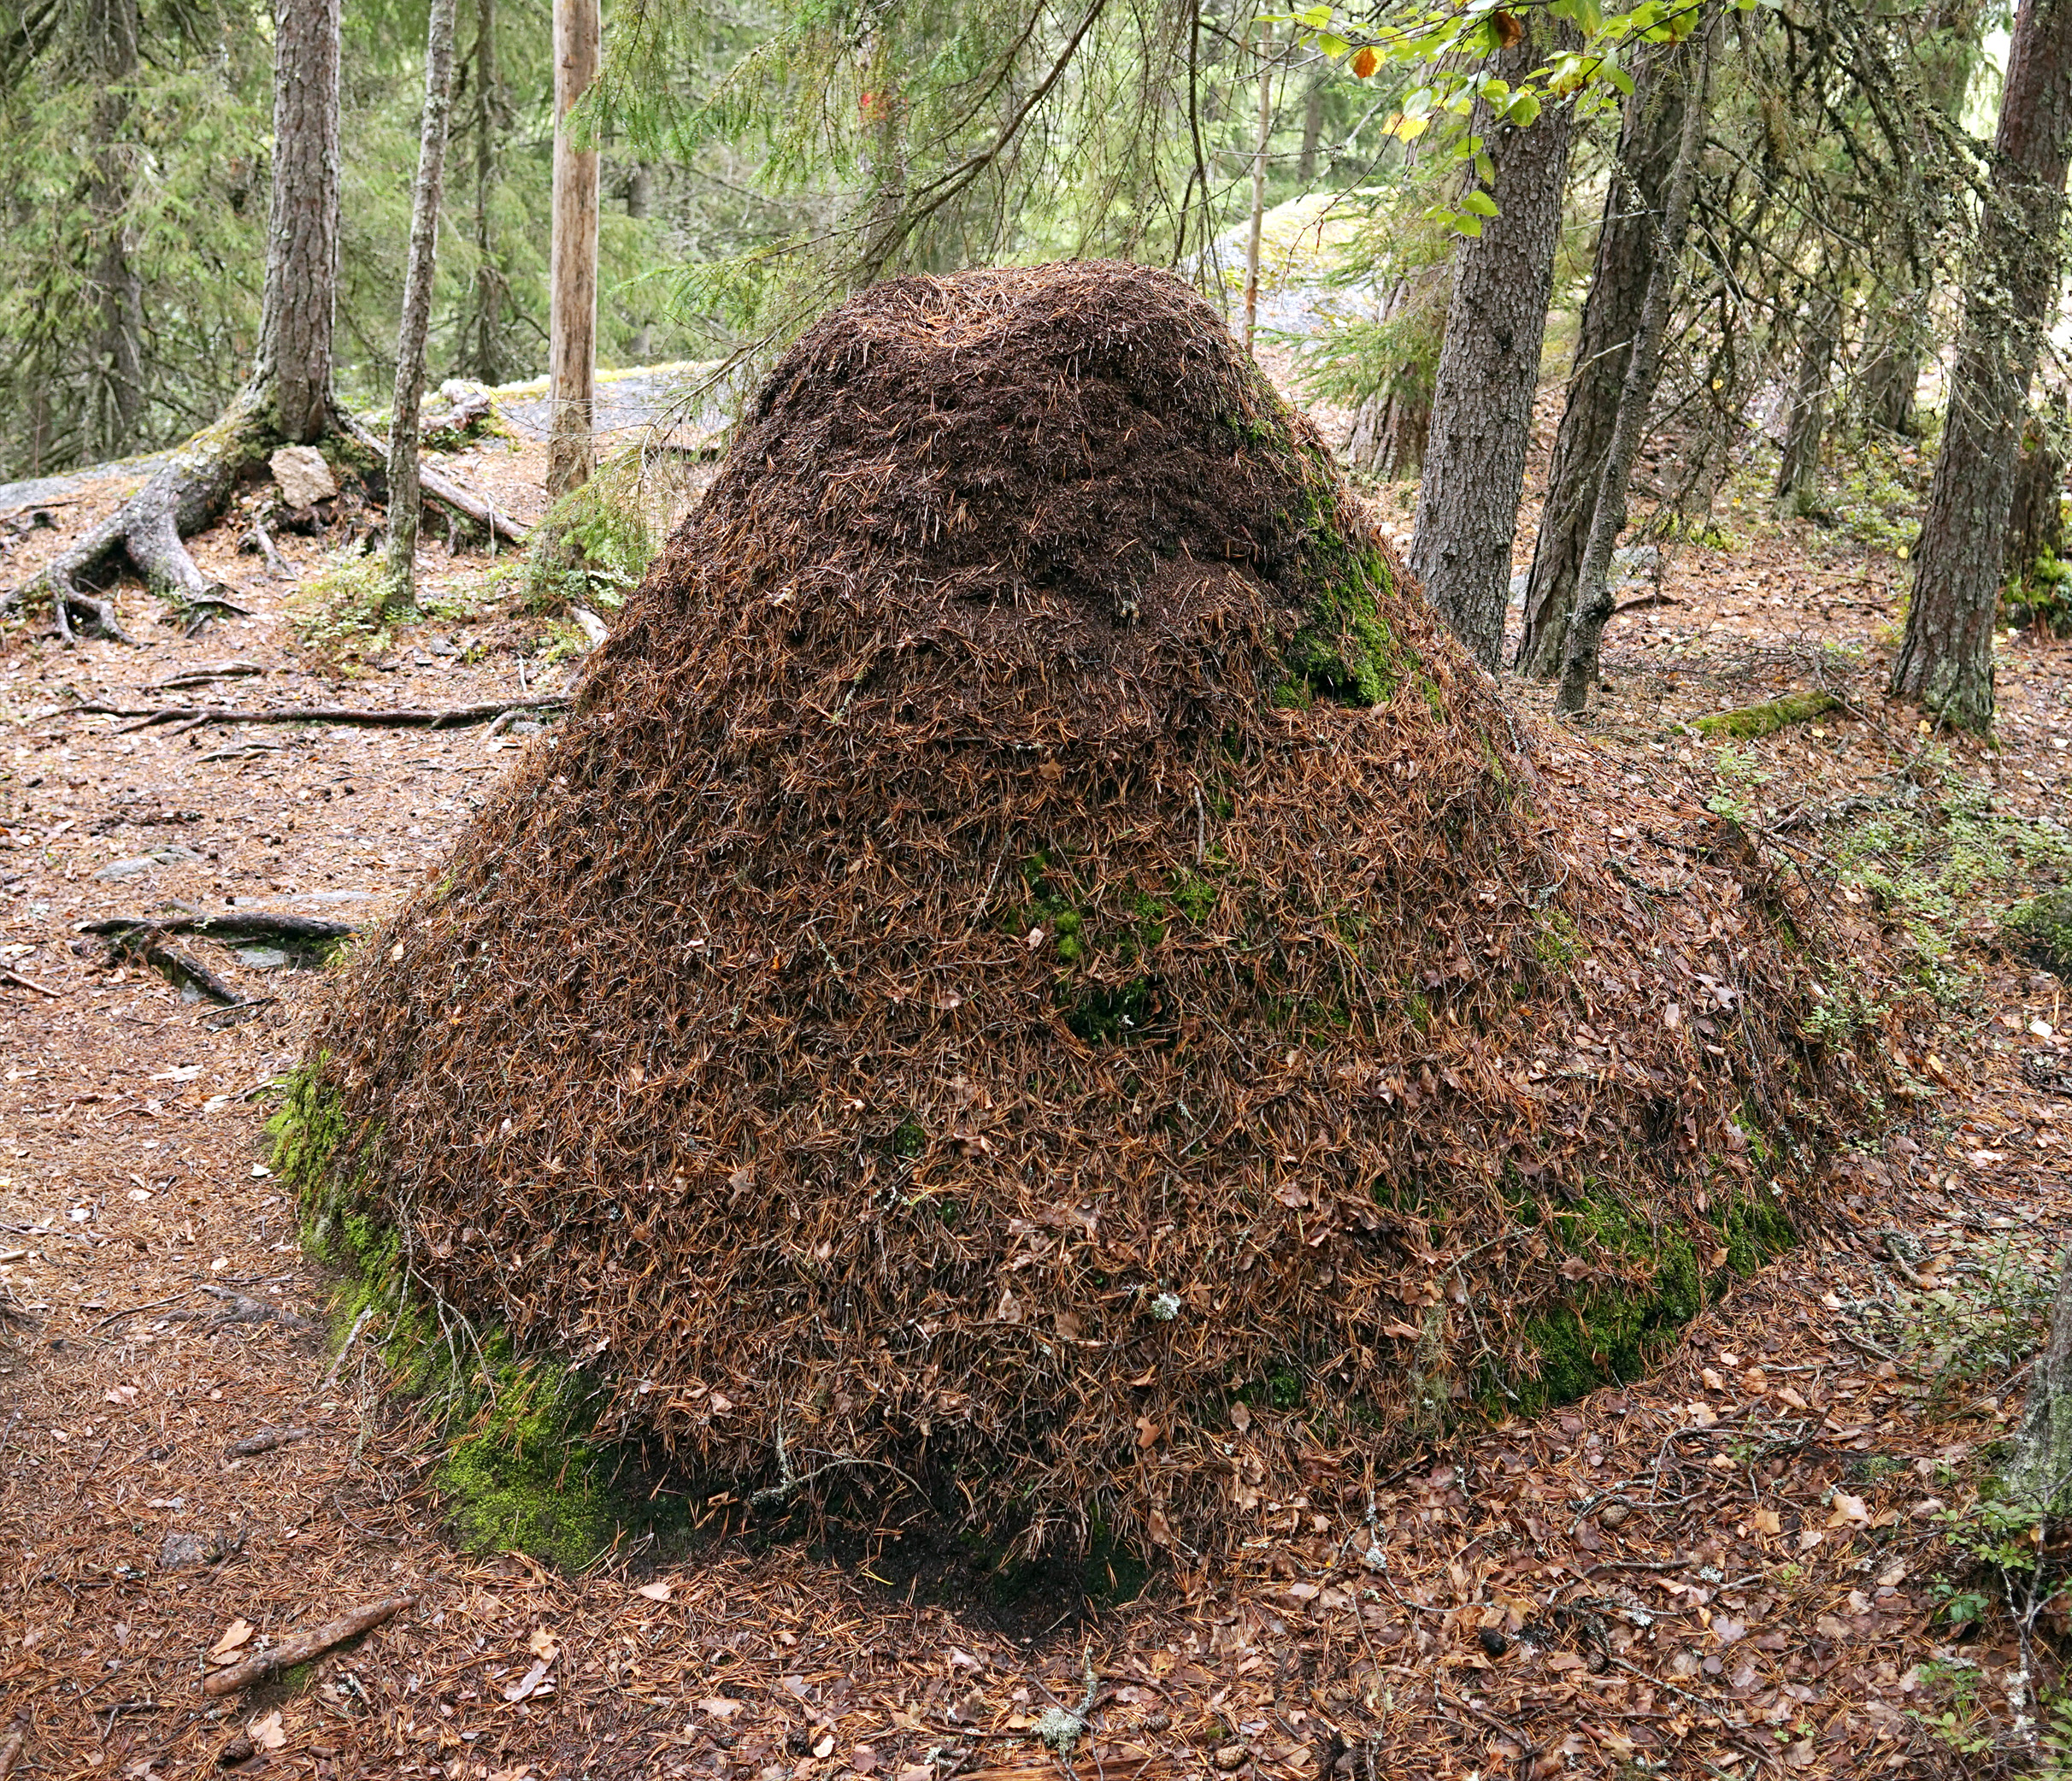 Ant hill in Finland